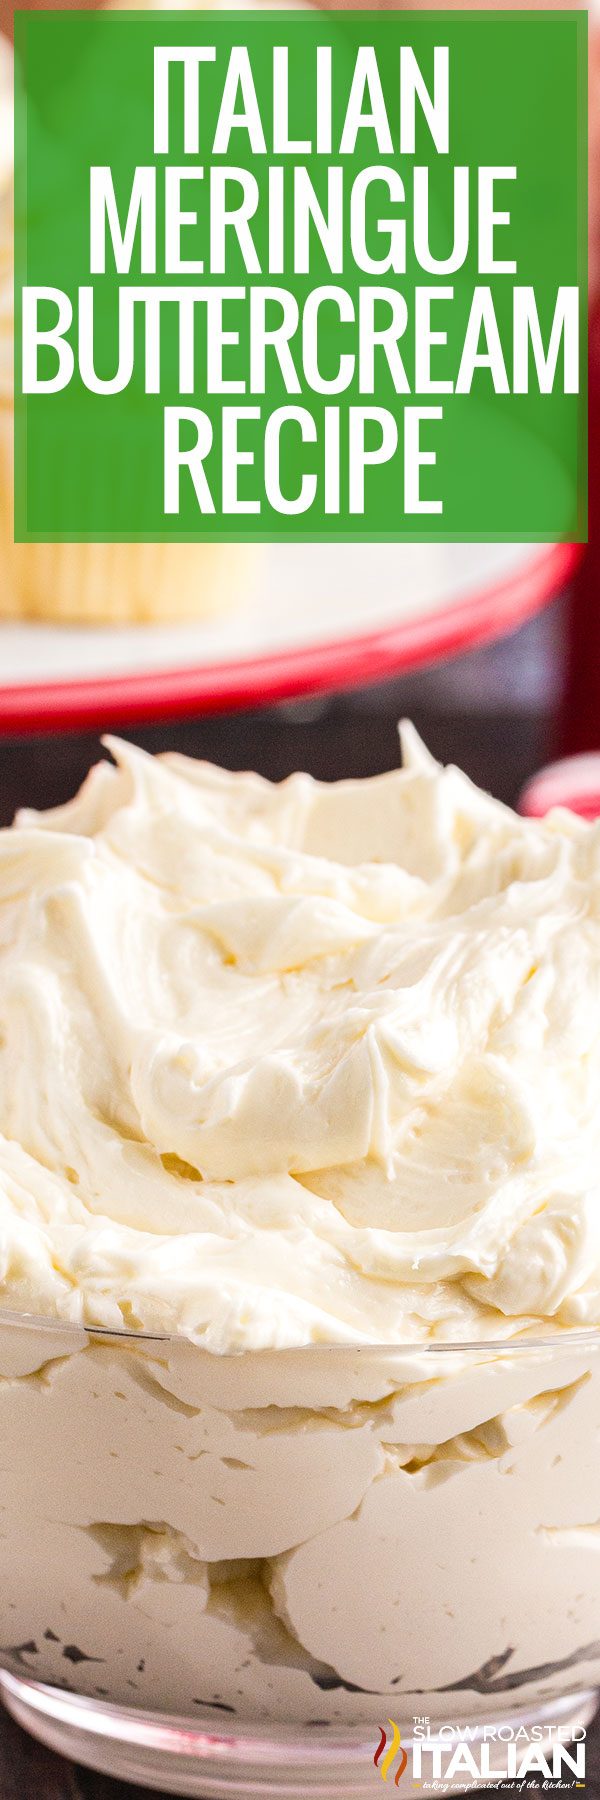 titled image (and shown): meringue buttercream recipe